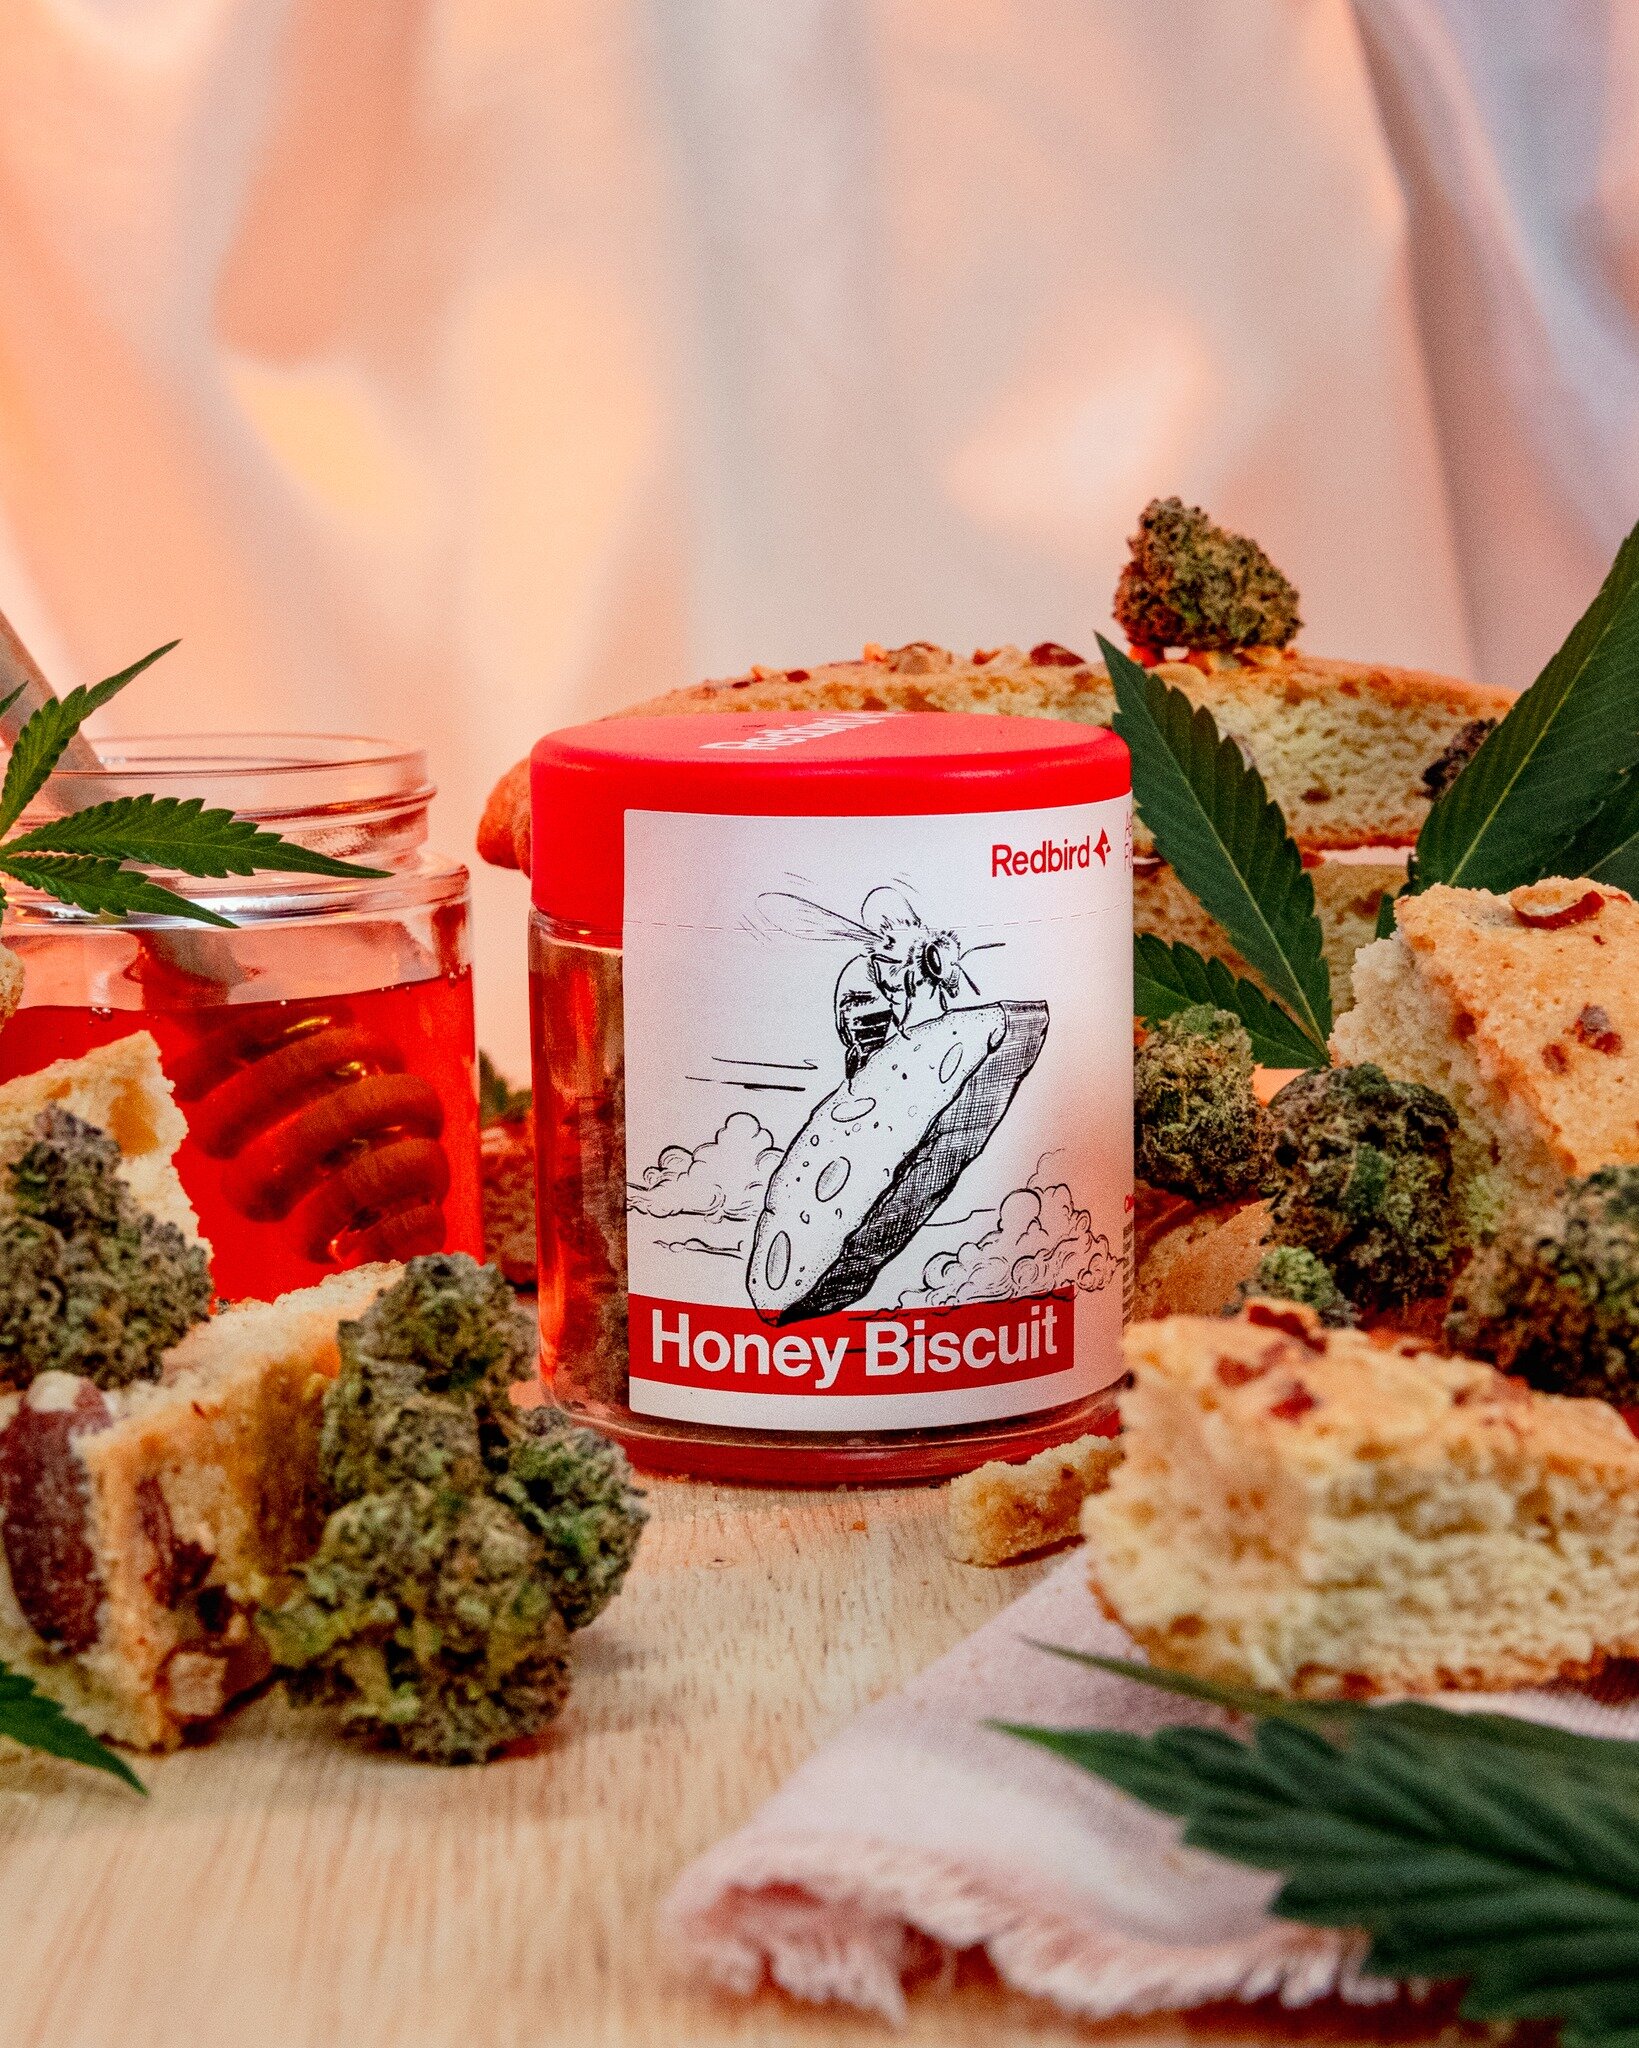 Sit down in your favorite chair, grab a cup of tea, and enjoy some HONEY BISCUIT, an indica dominant cross of Biscotti x MaiTai #4. 

***This product has intoxicating effects and may be habit forming. Marijuana can impair concentration, coordination,